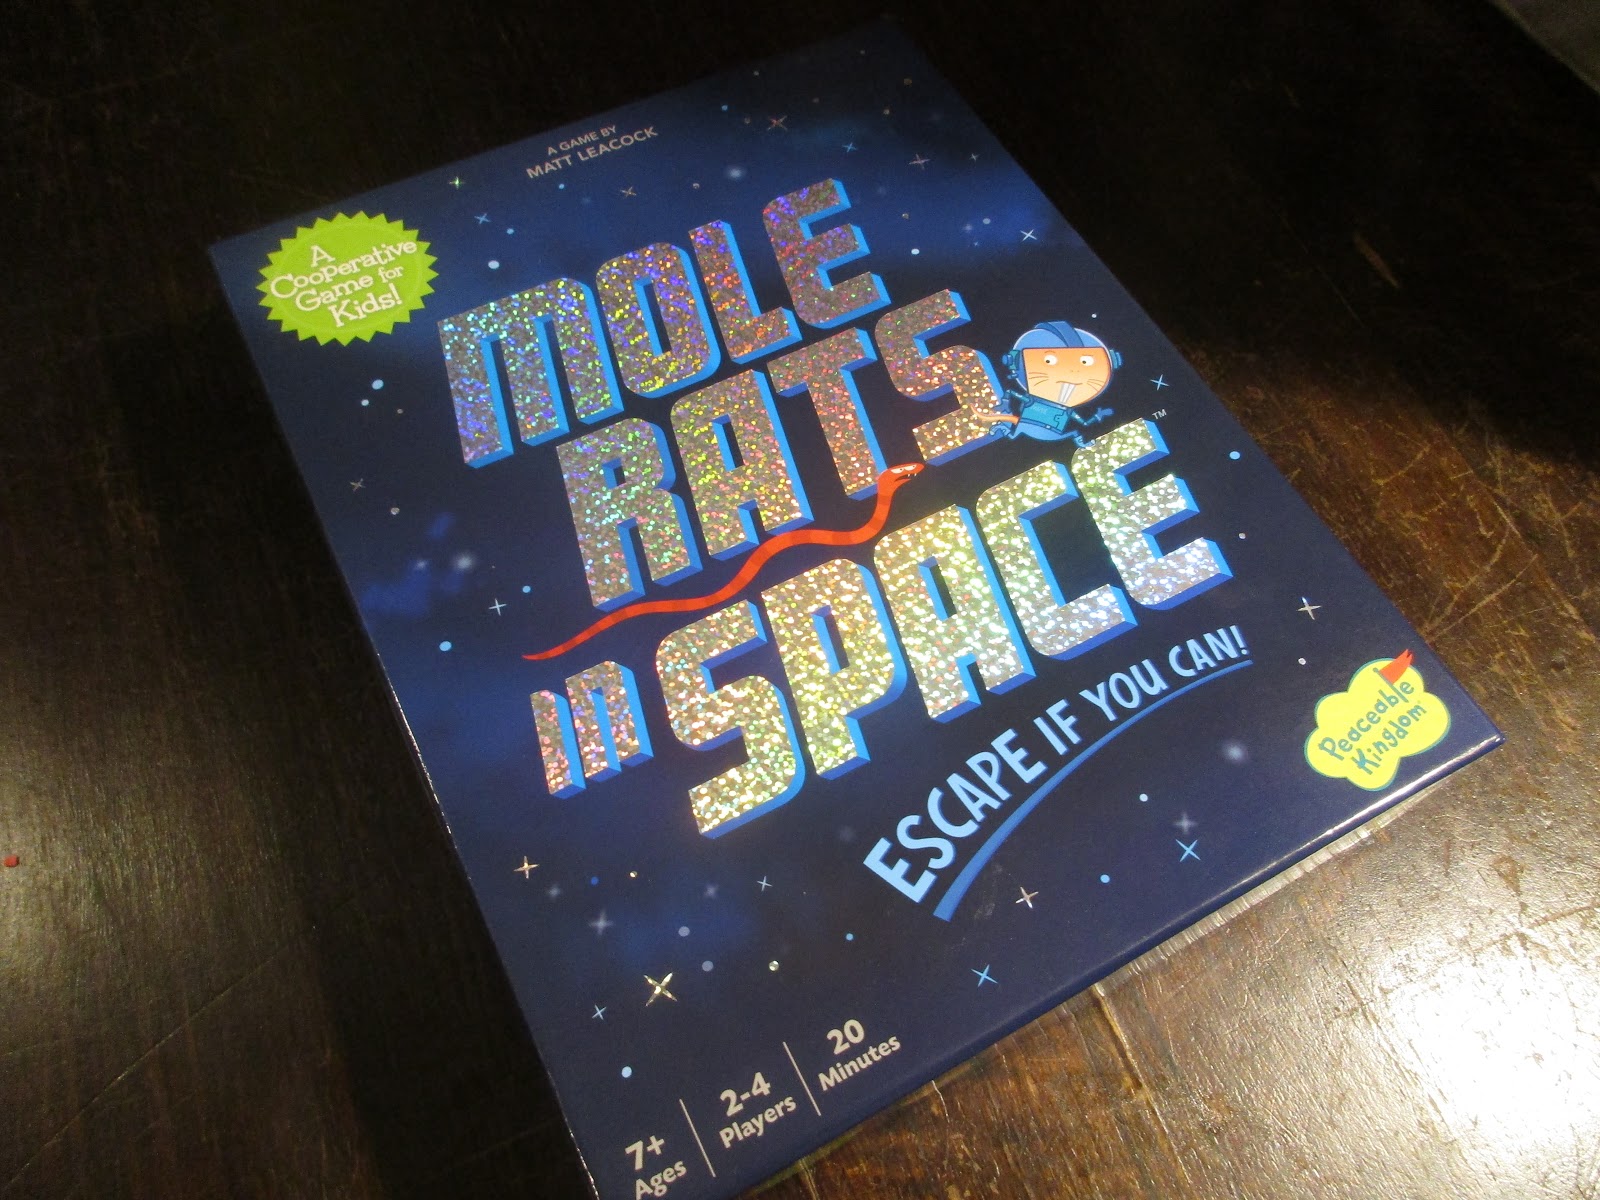 Cooperative Family Game Mole Rats In Space Age 7+ 2-4 Players